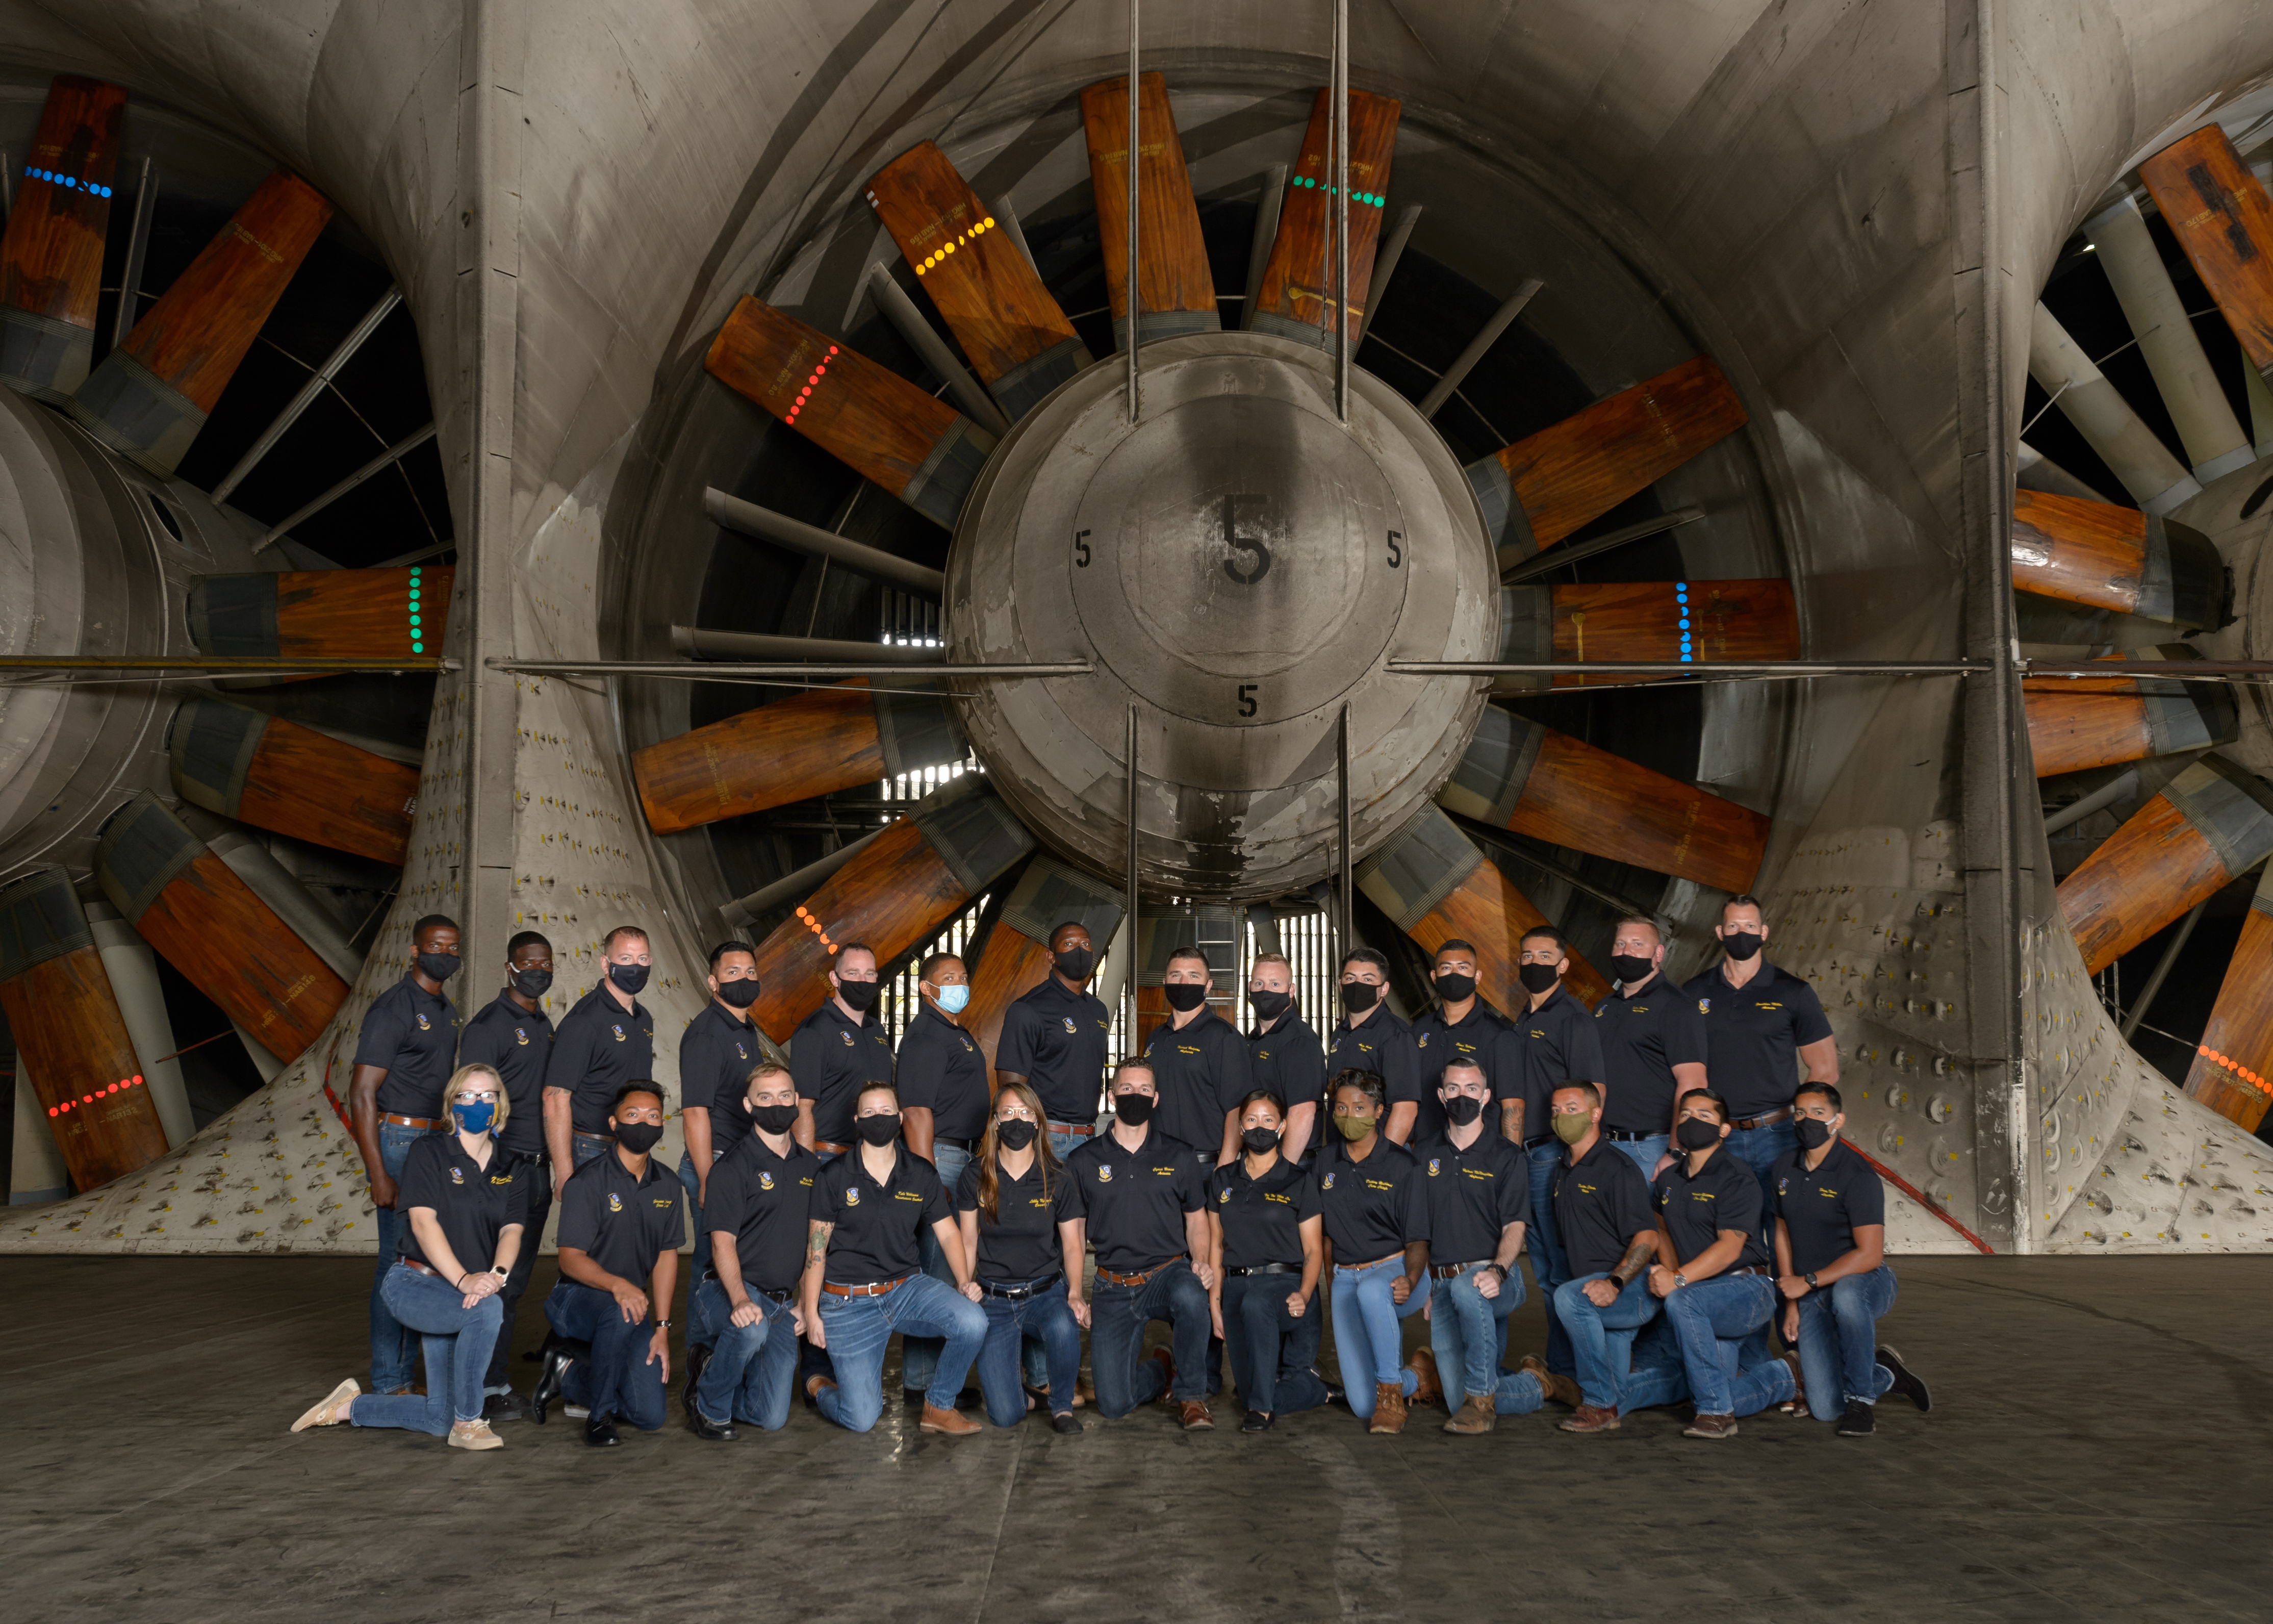 A large group of people all dressed in navy blue shirts and jeans pose in front of a fan 40 feet in diameter.